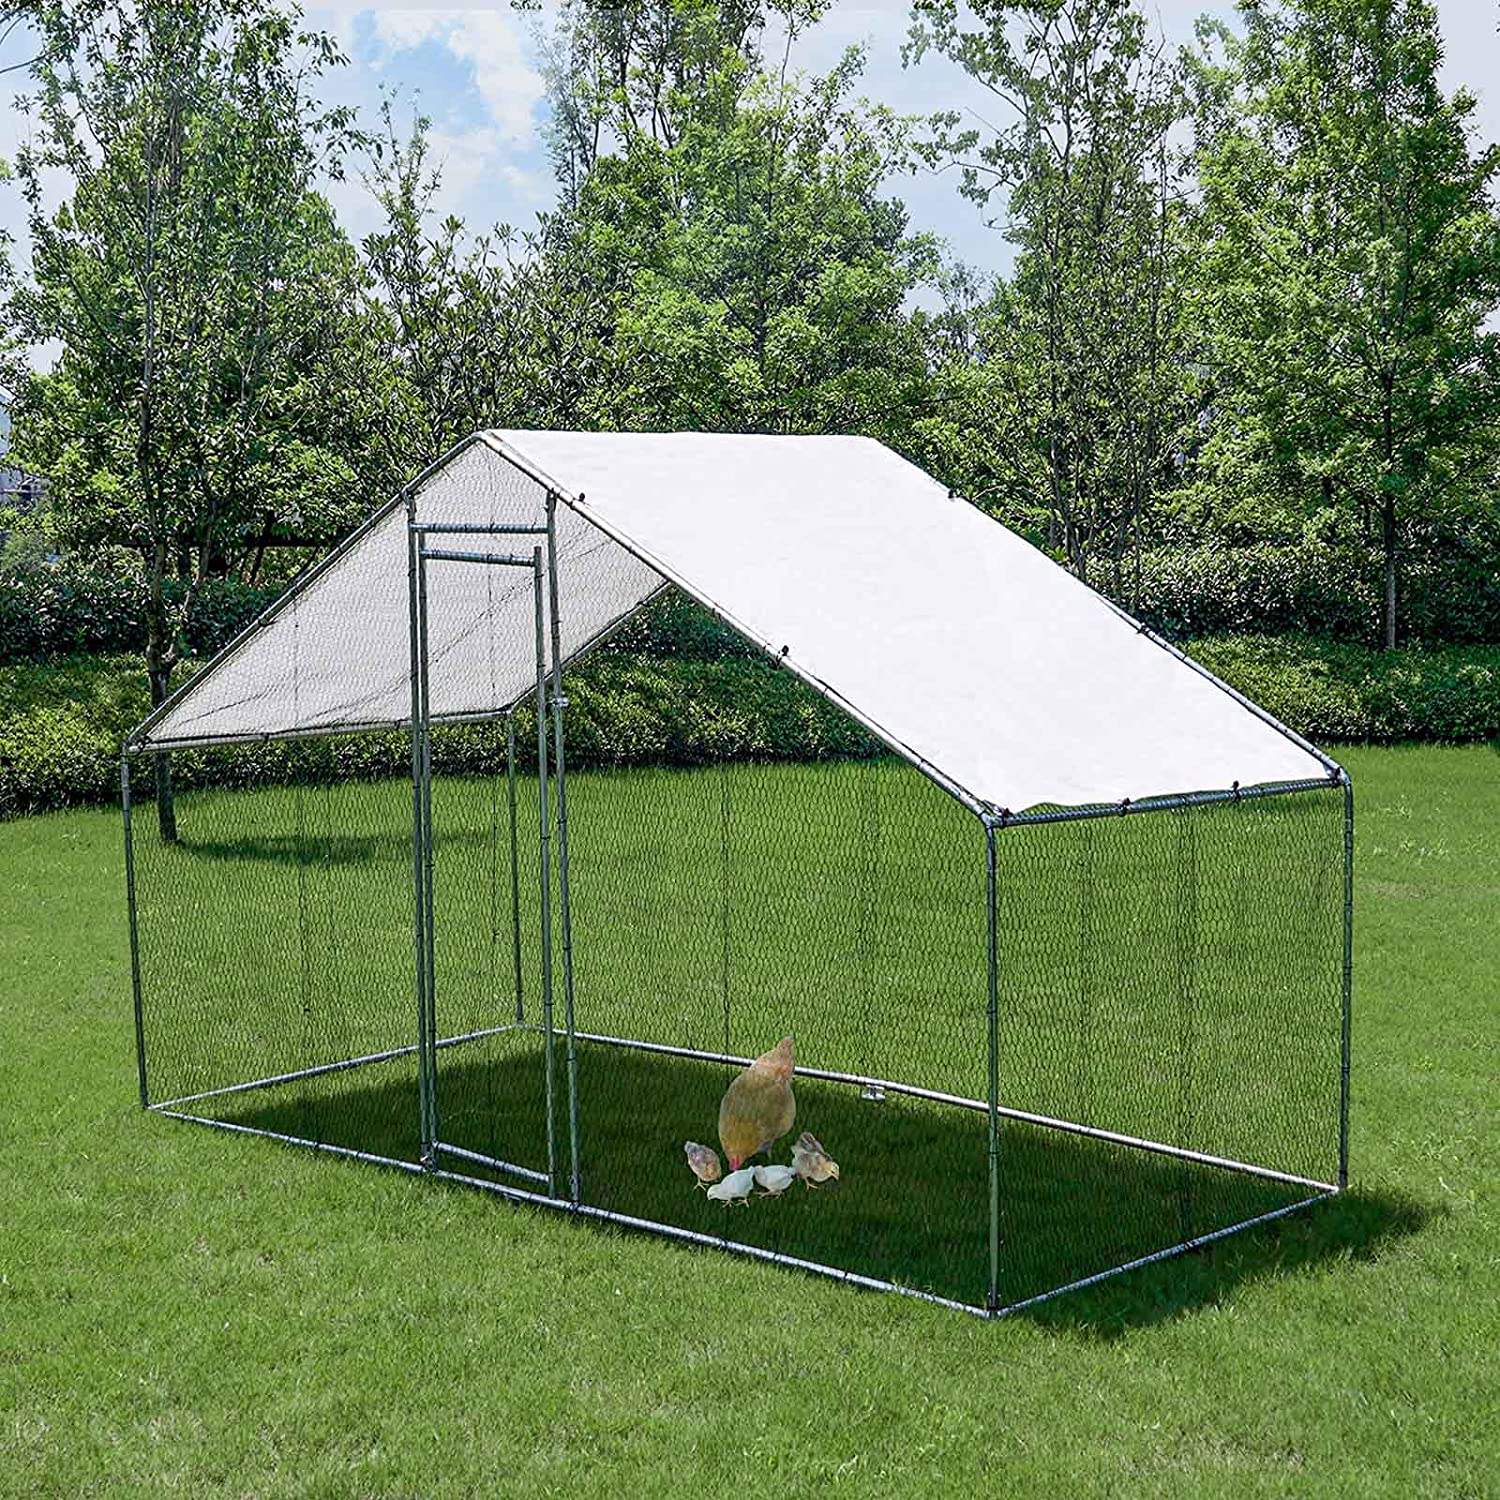 Chicken Coop, Large Metal Chicken Coop Walk in Poultry Cage Hen Run House Rabbits Cage with Waterproof & Anti-Uv Cover, Galvanized Steel Coops for Outdoor Backyard Farm Garden Animals & Pet Supplies > Pet Supplies > Dog Supplies > Dog Kennels & Runs JOIONE 9.8'L x 6.5'W x 6.5'H  